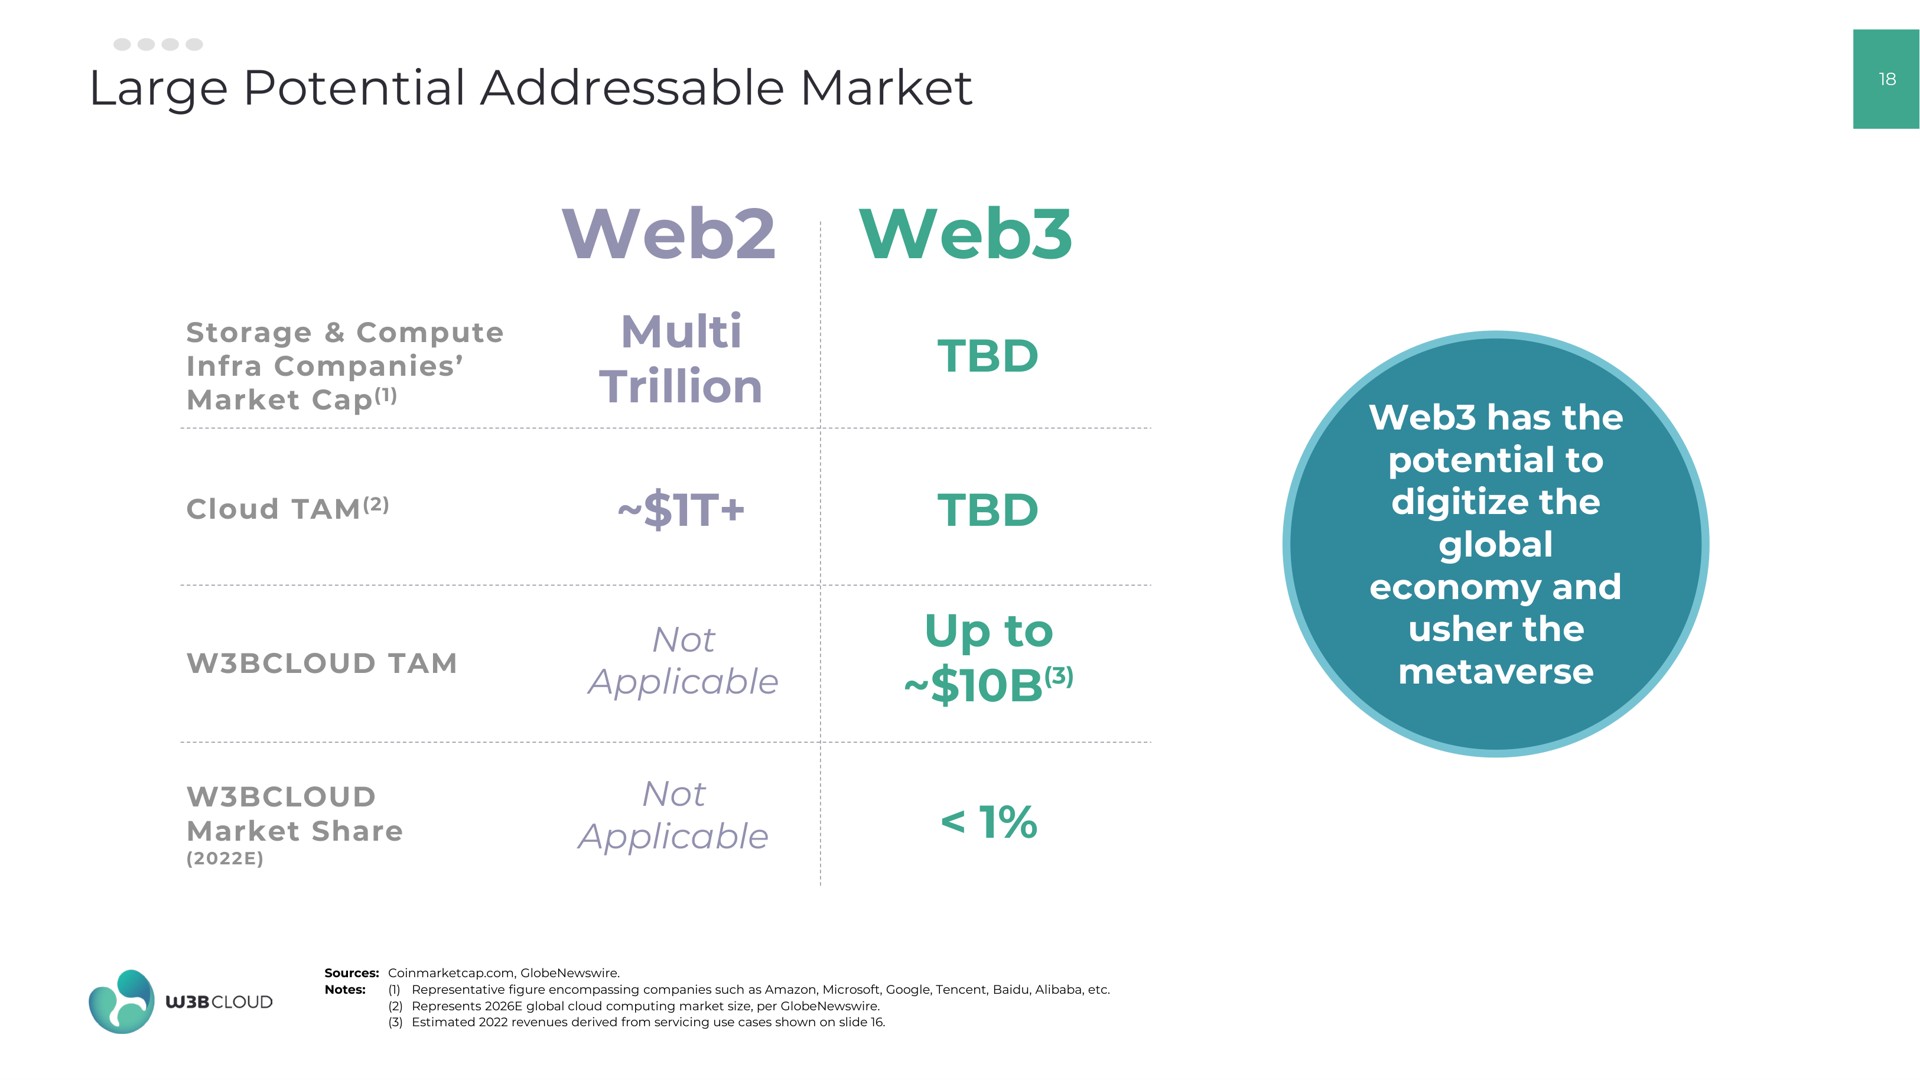 large potential market web web trillion up to cap cloud tam fit not applicable share applicable has the fet global economy and usher the | W3BCLOUD